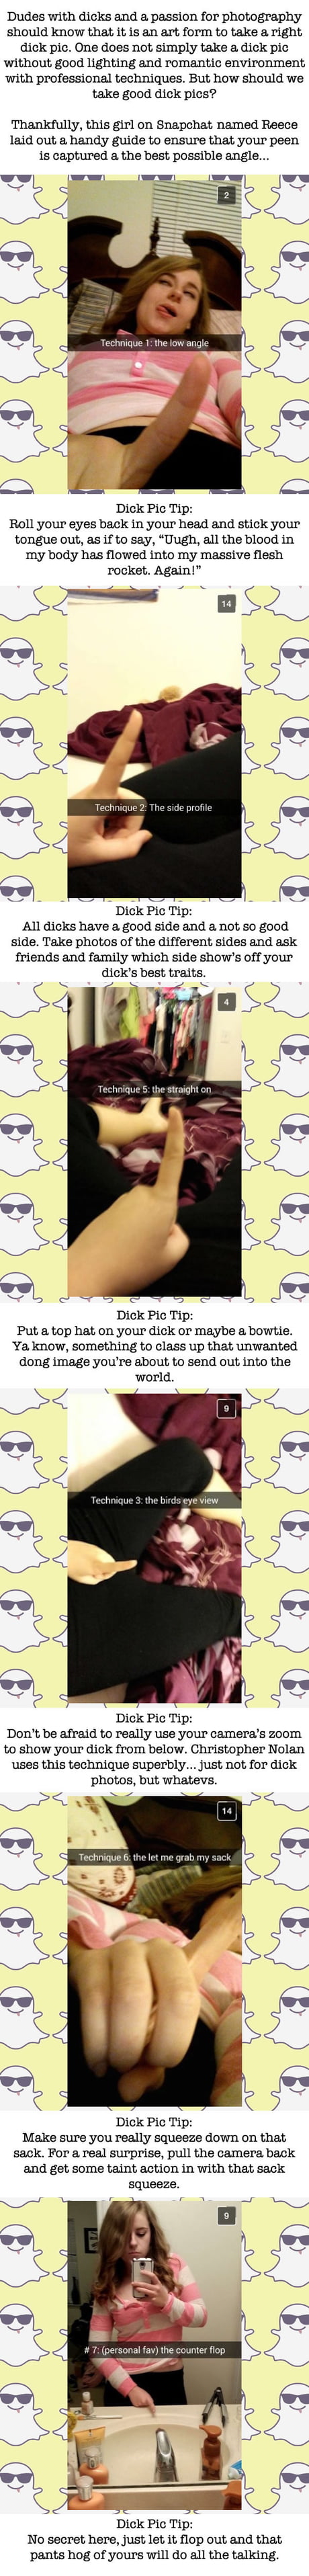 alaa hamouda recommends how to take the perfect dick pic pic